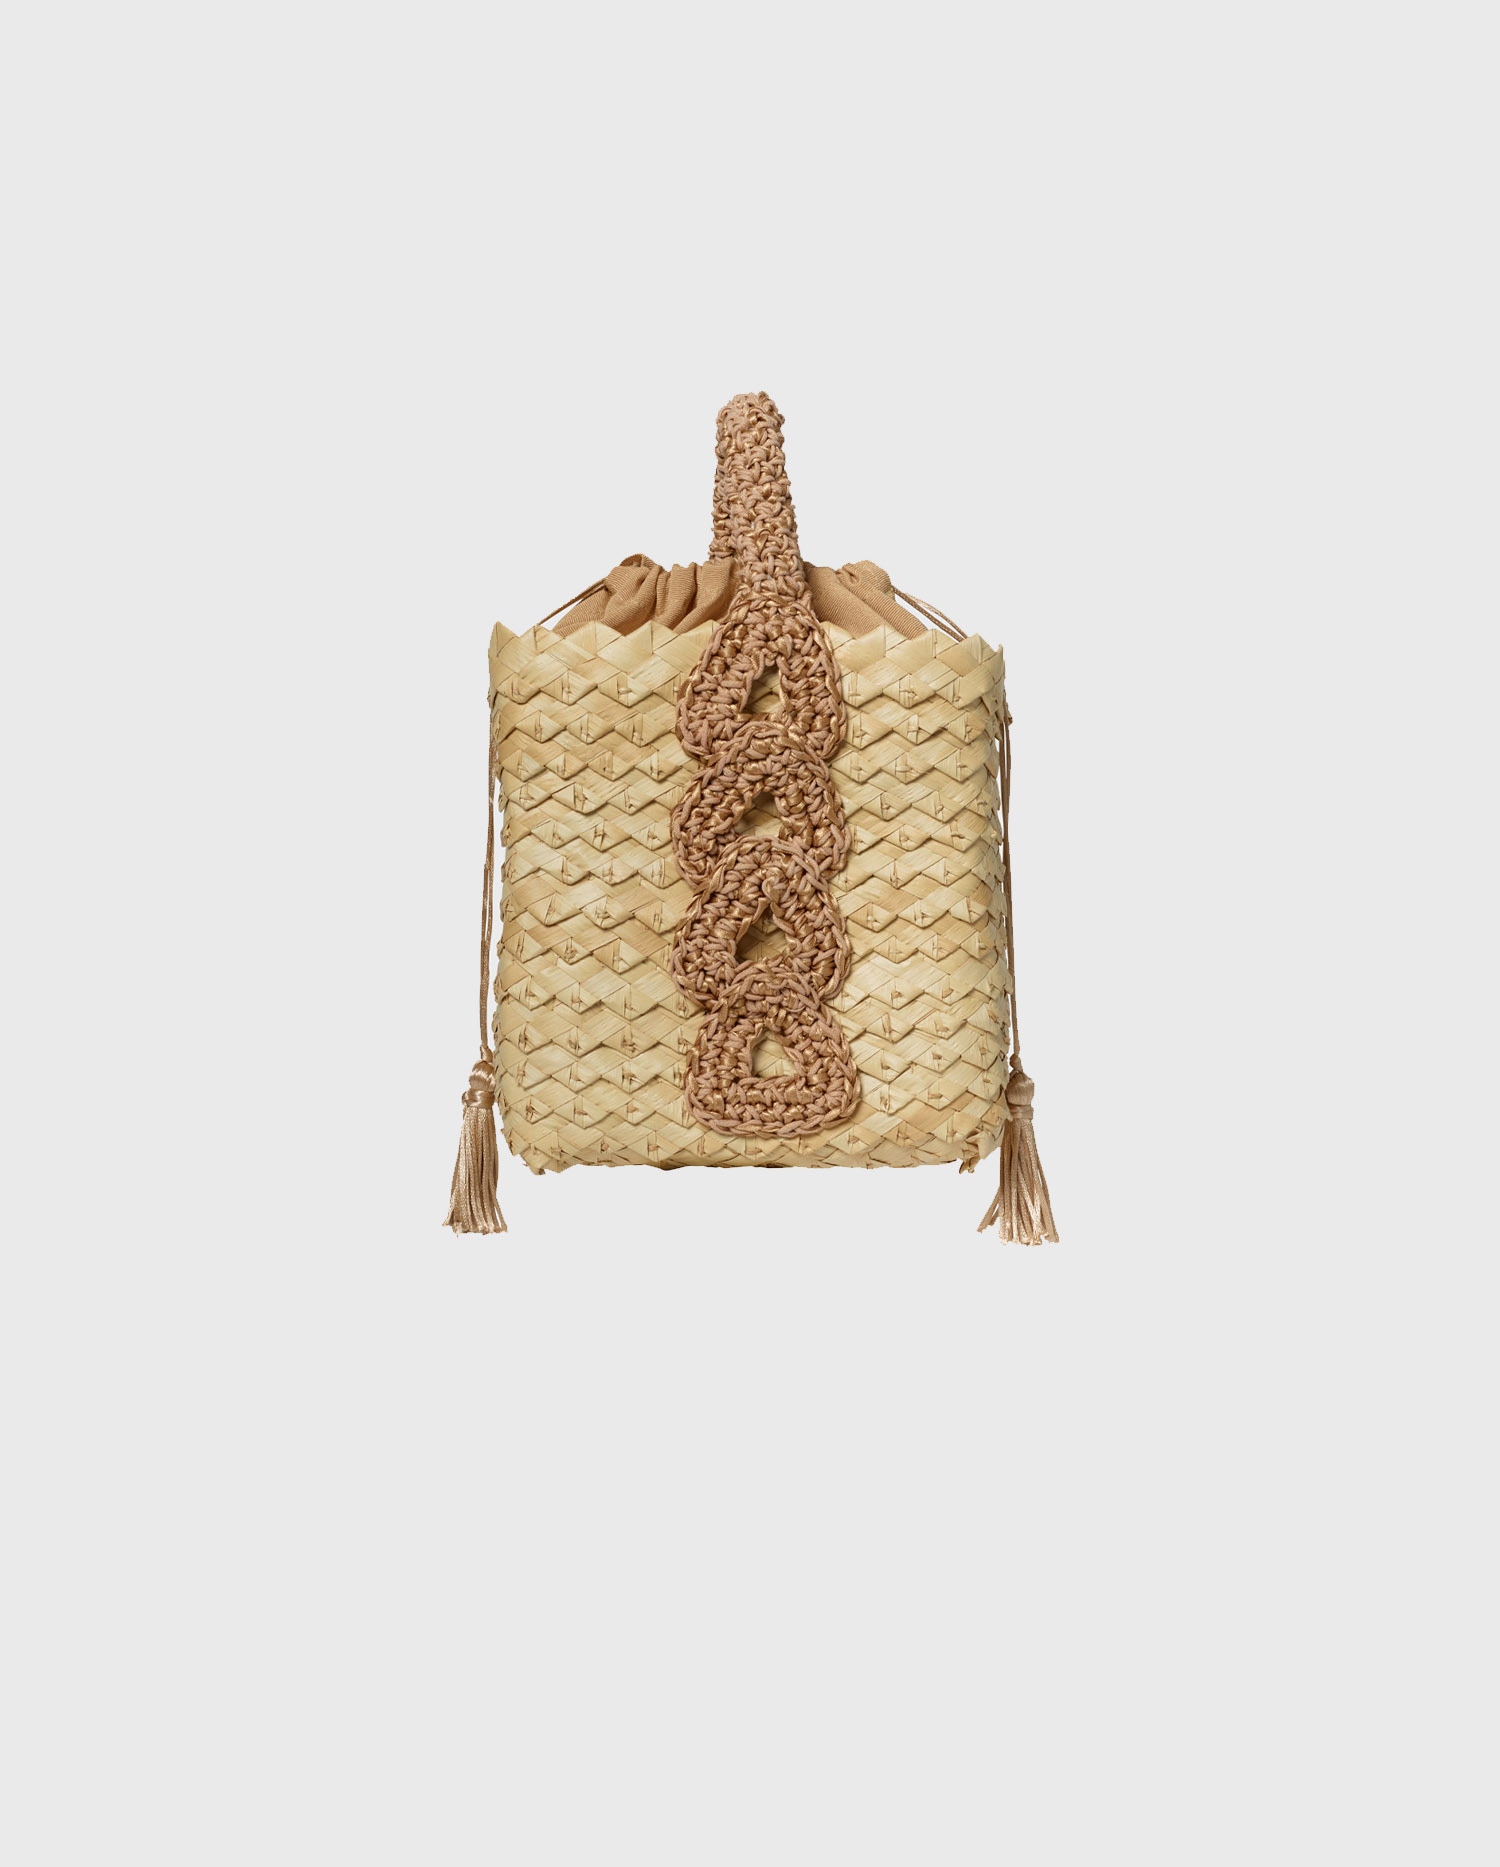 Shop the BIXENTE natural color square bucket handbag with woven handle and drawstring closure from ANNE FONTAINE